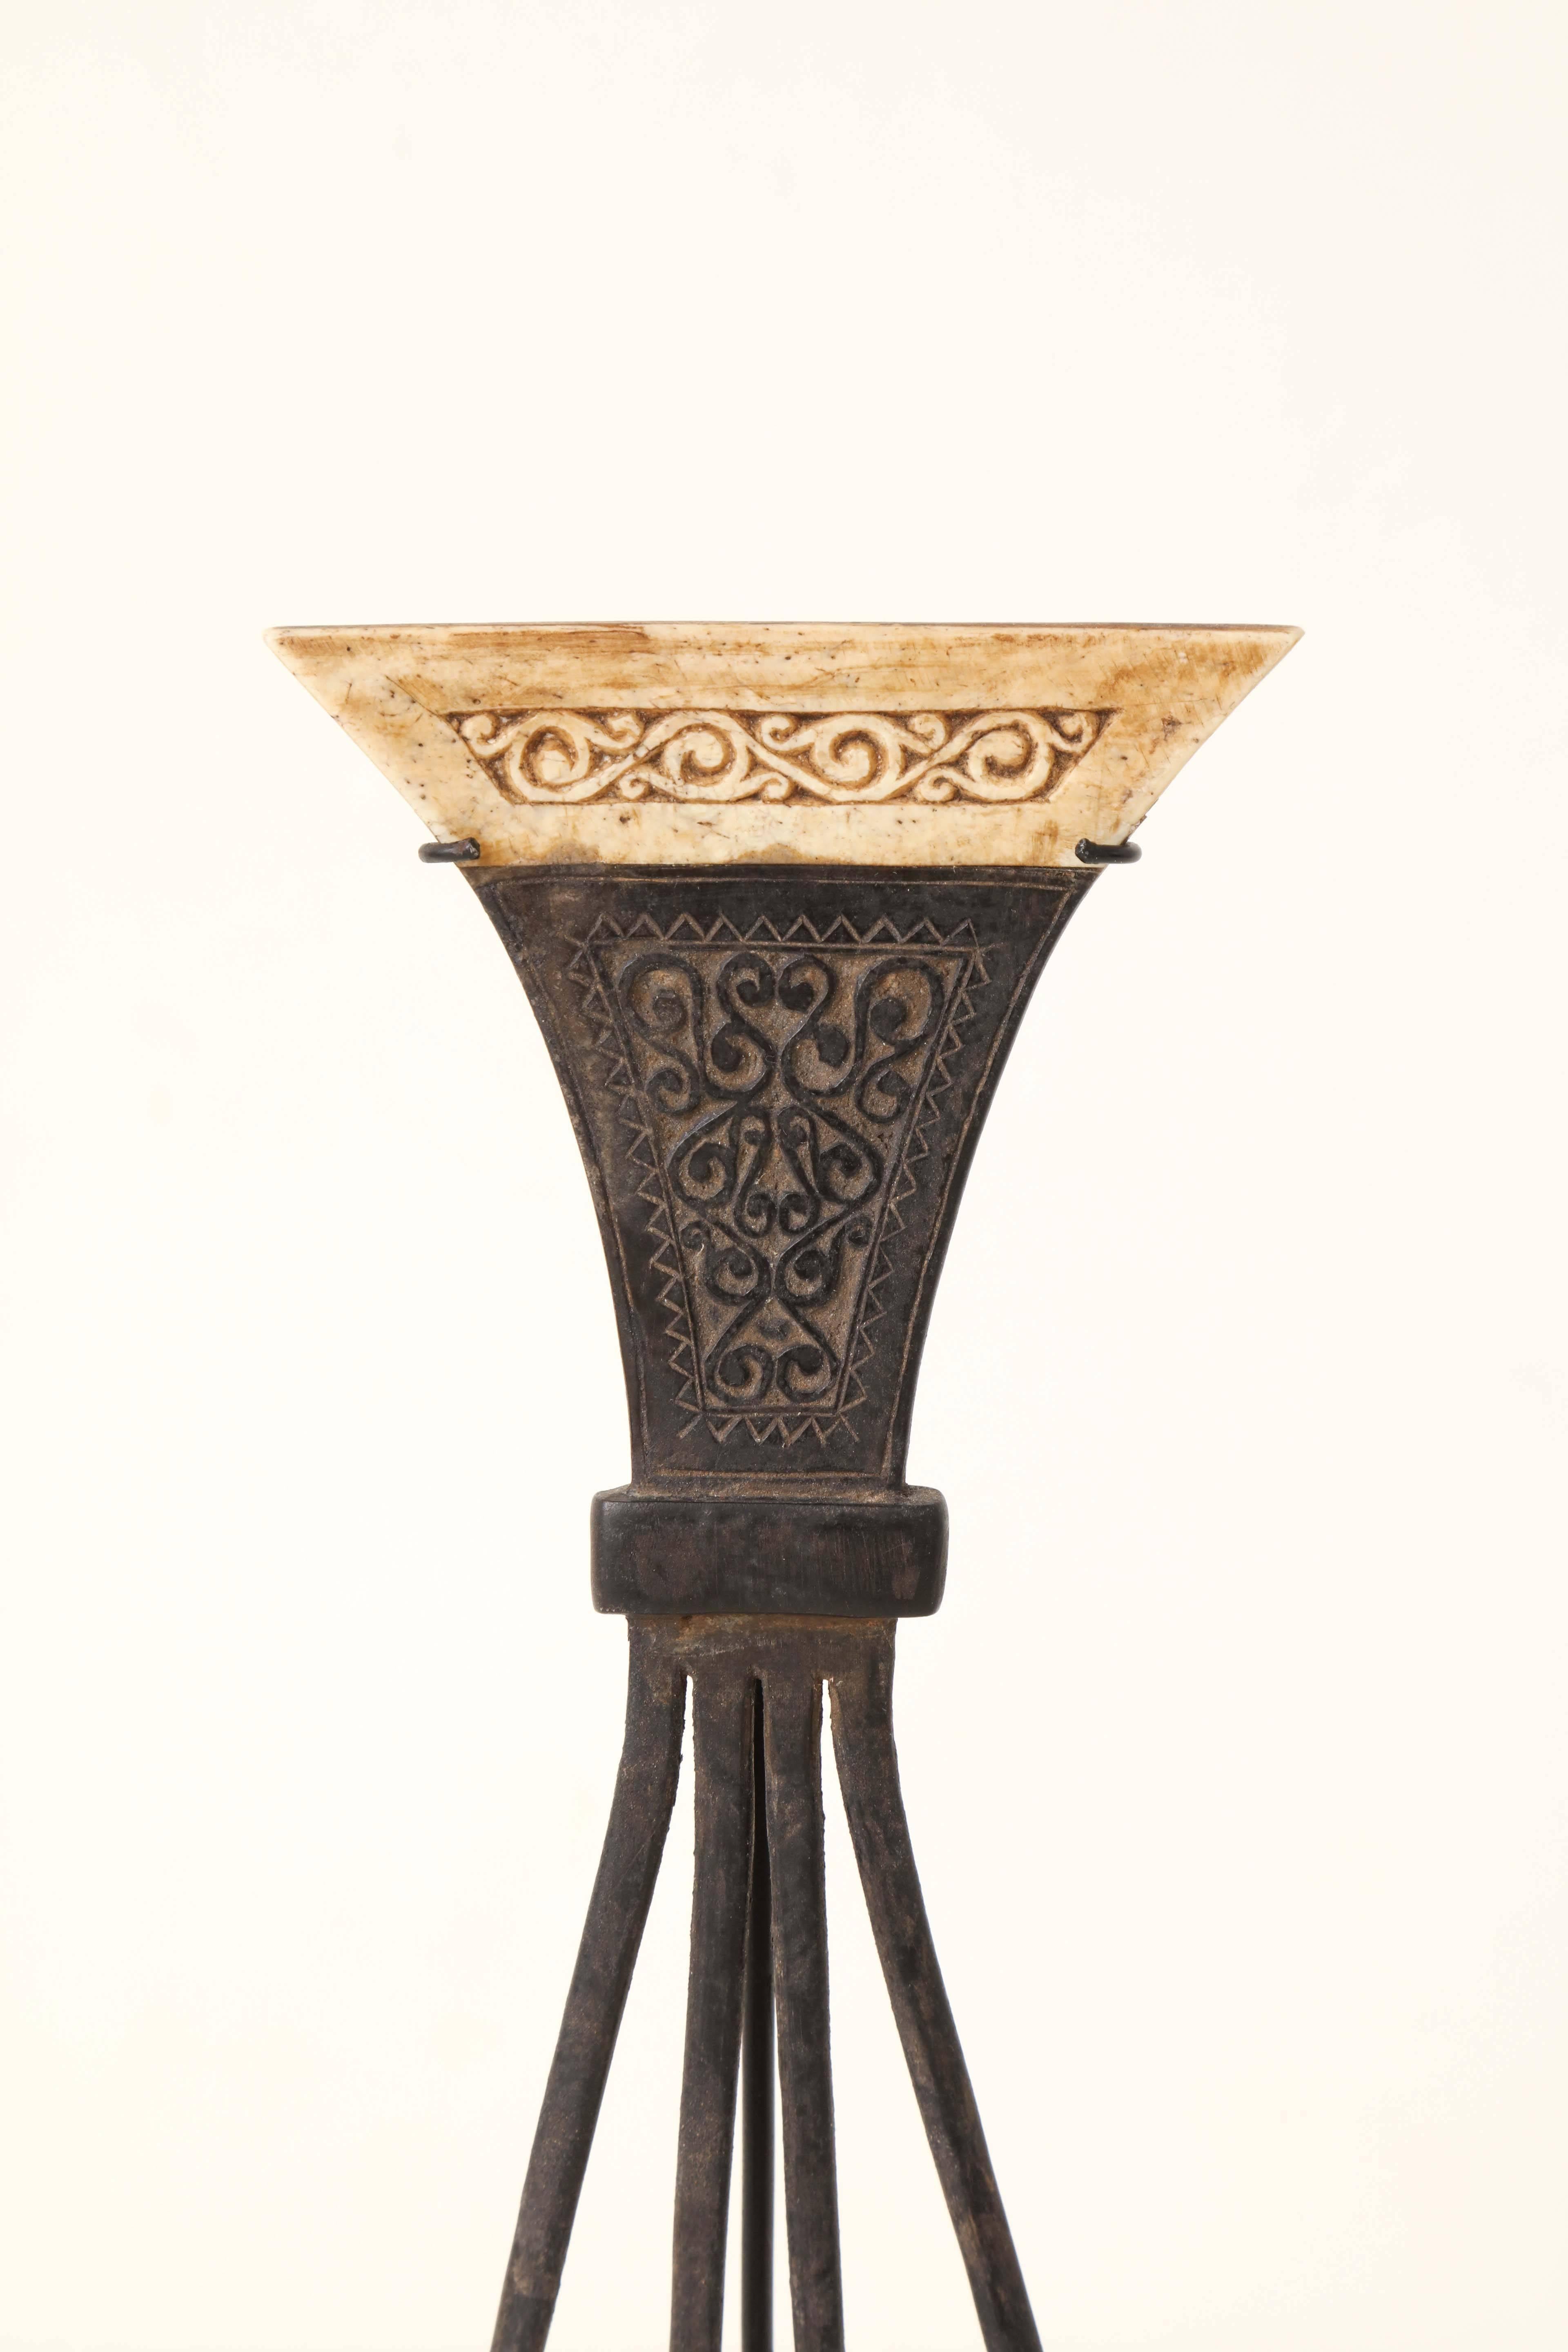 A late 19th-early 20th century Indonesian carved wood and bone Moluccas comb, mounted on a contemporary stand.